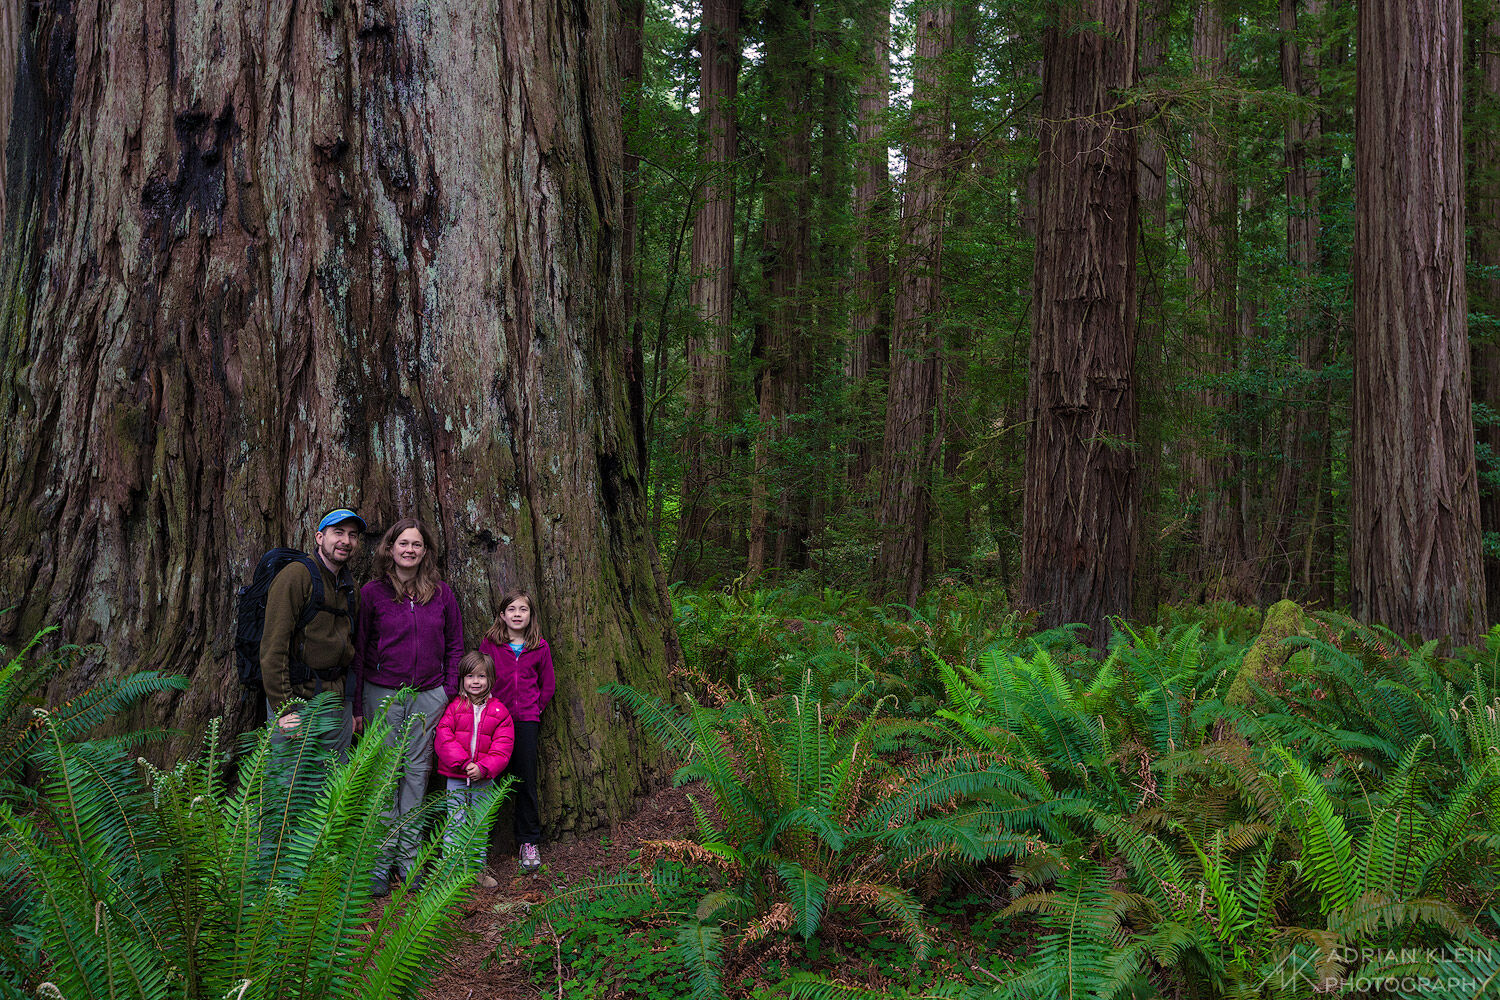 My family looking very small next to a ginormous redwood tree.